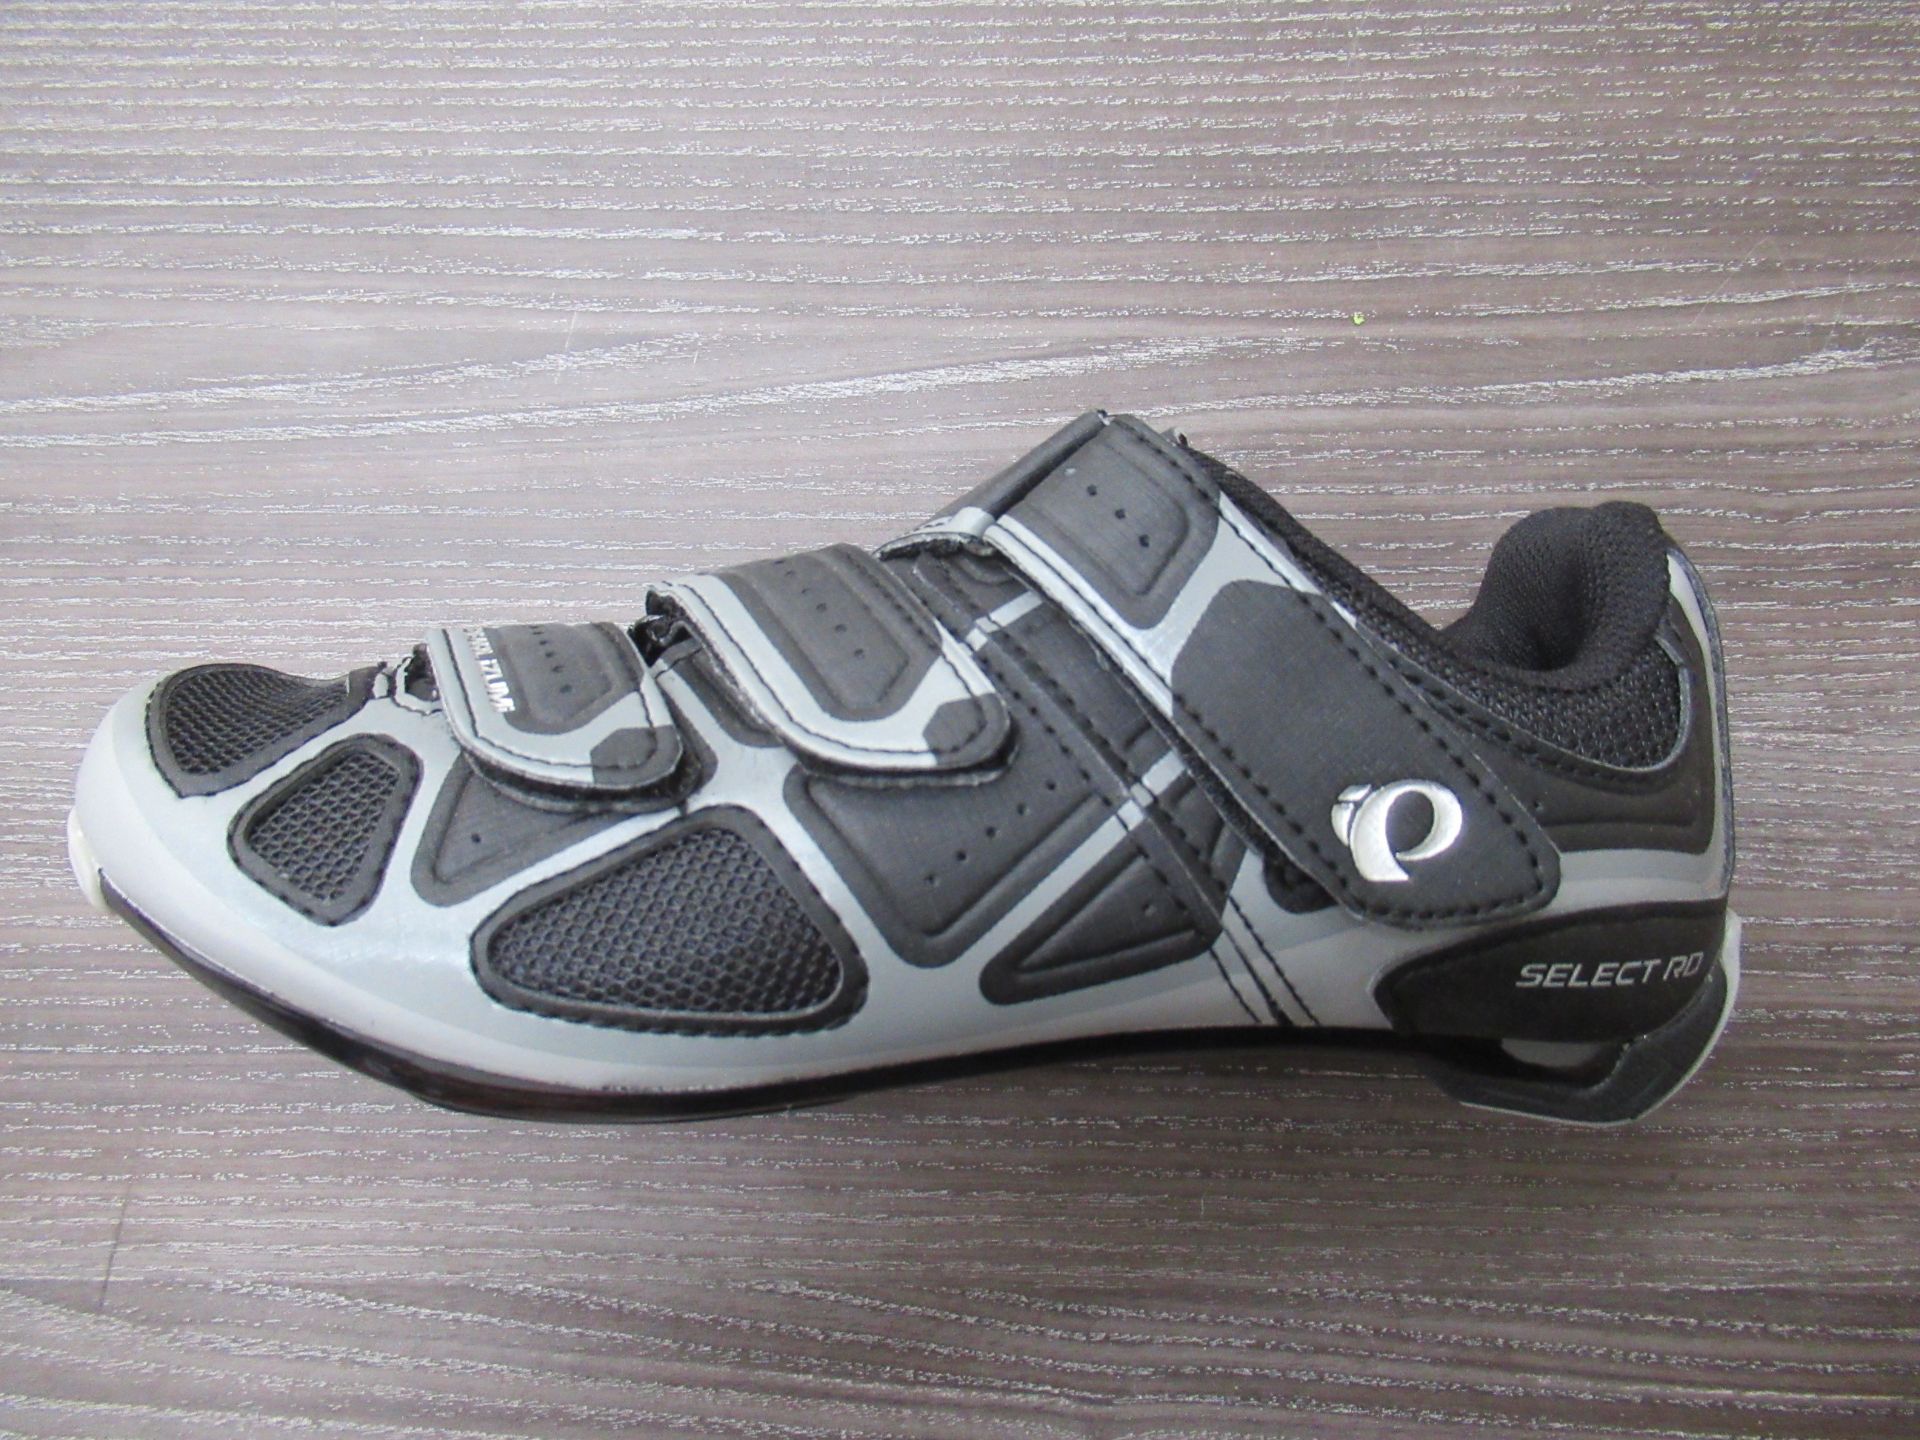 Pair of Pearl Izumi W Select RD IV ladies cycling shoes (black/black) - boxed EU size 37 (RRP£89.99)